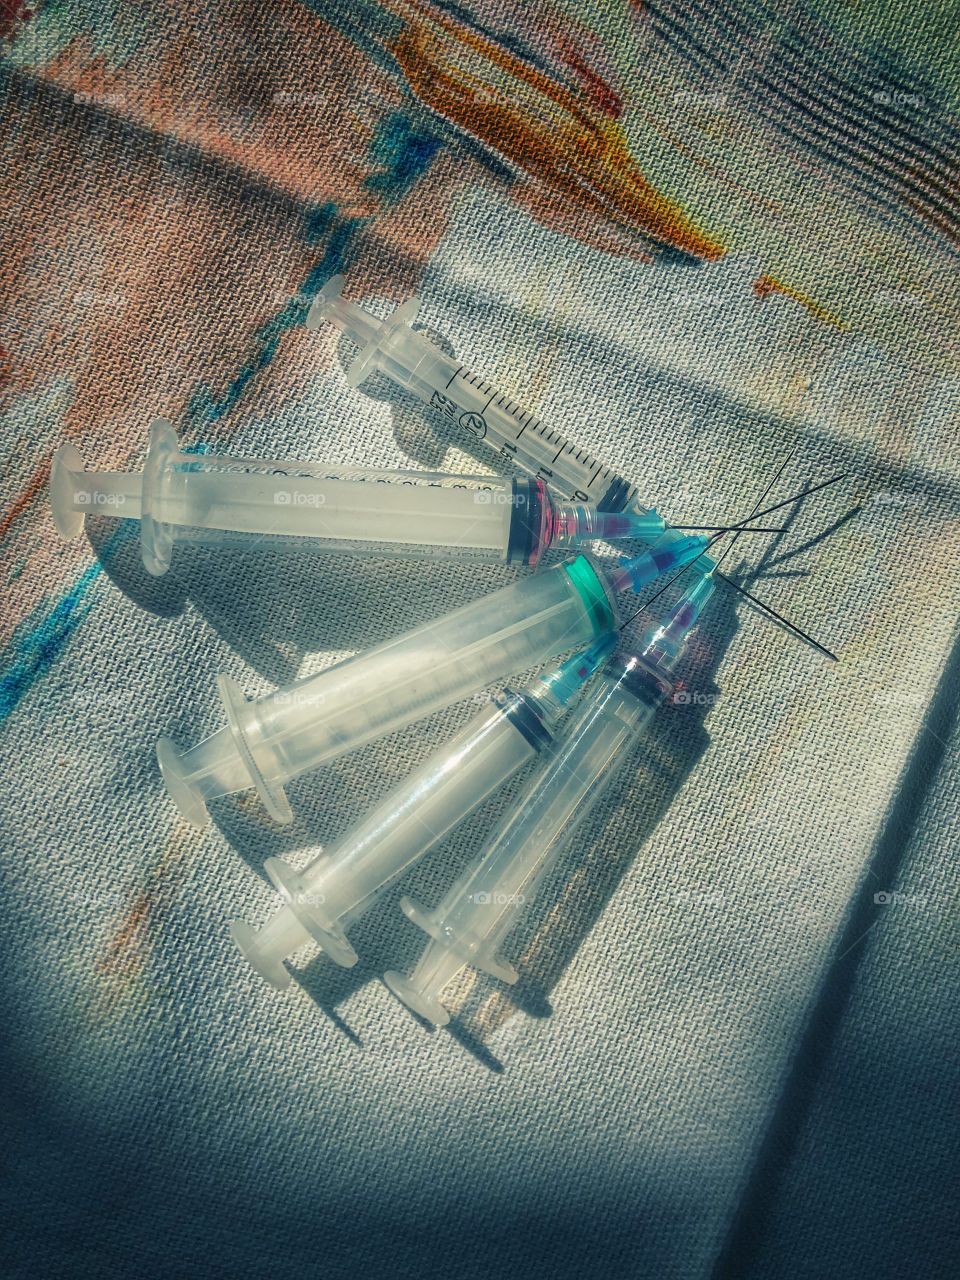 Flat lay of used syringes 